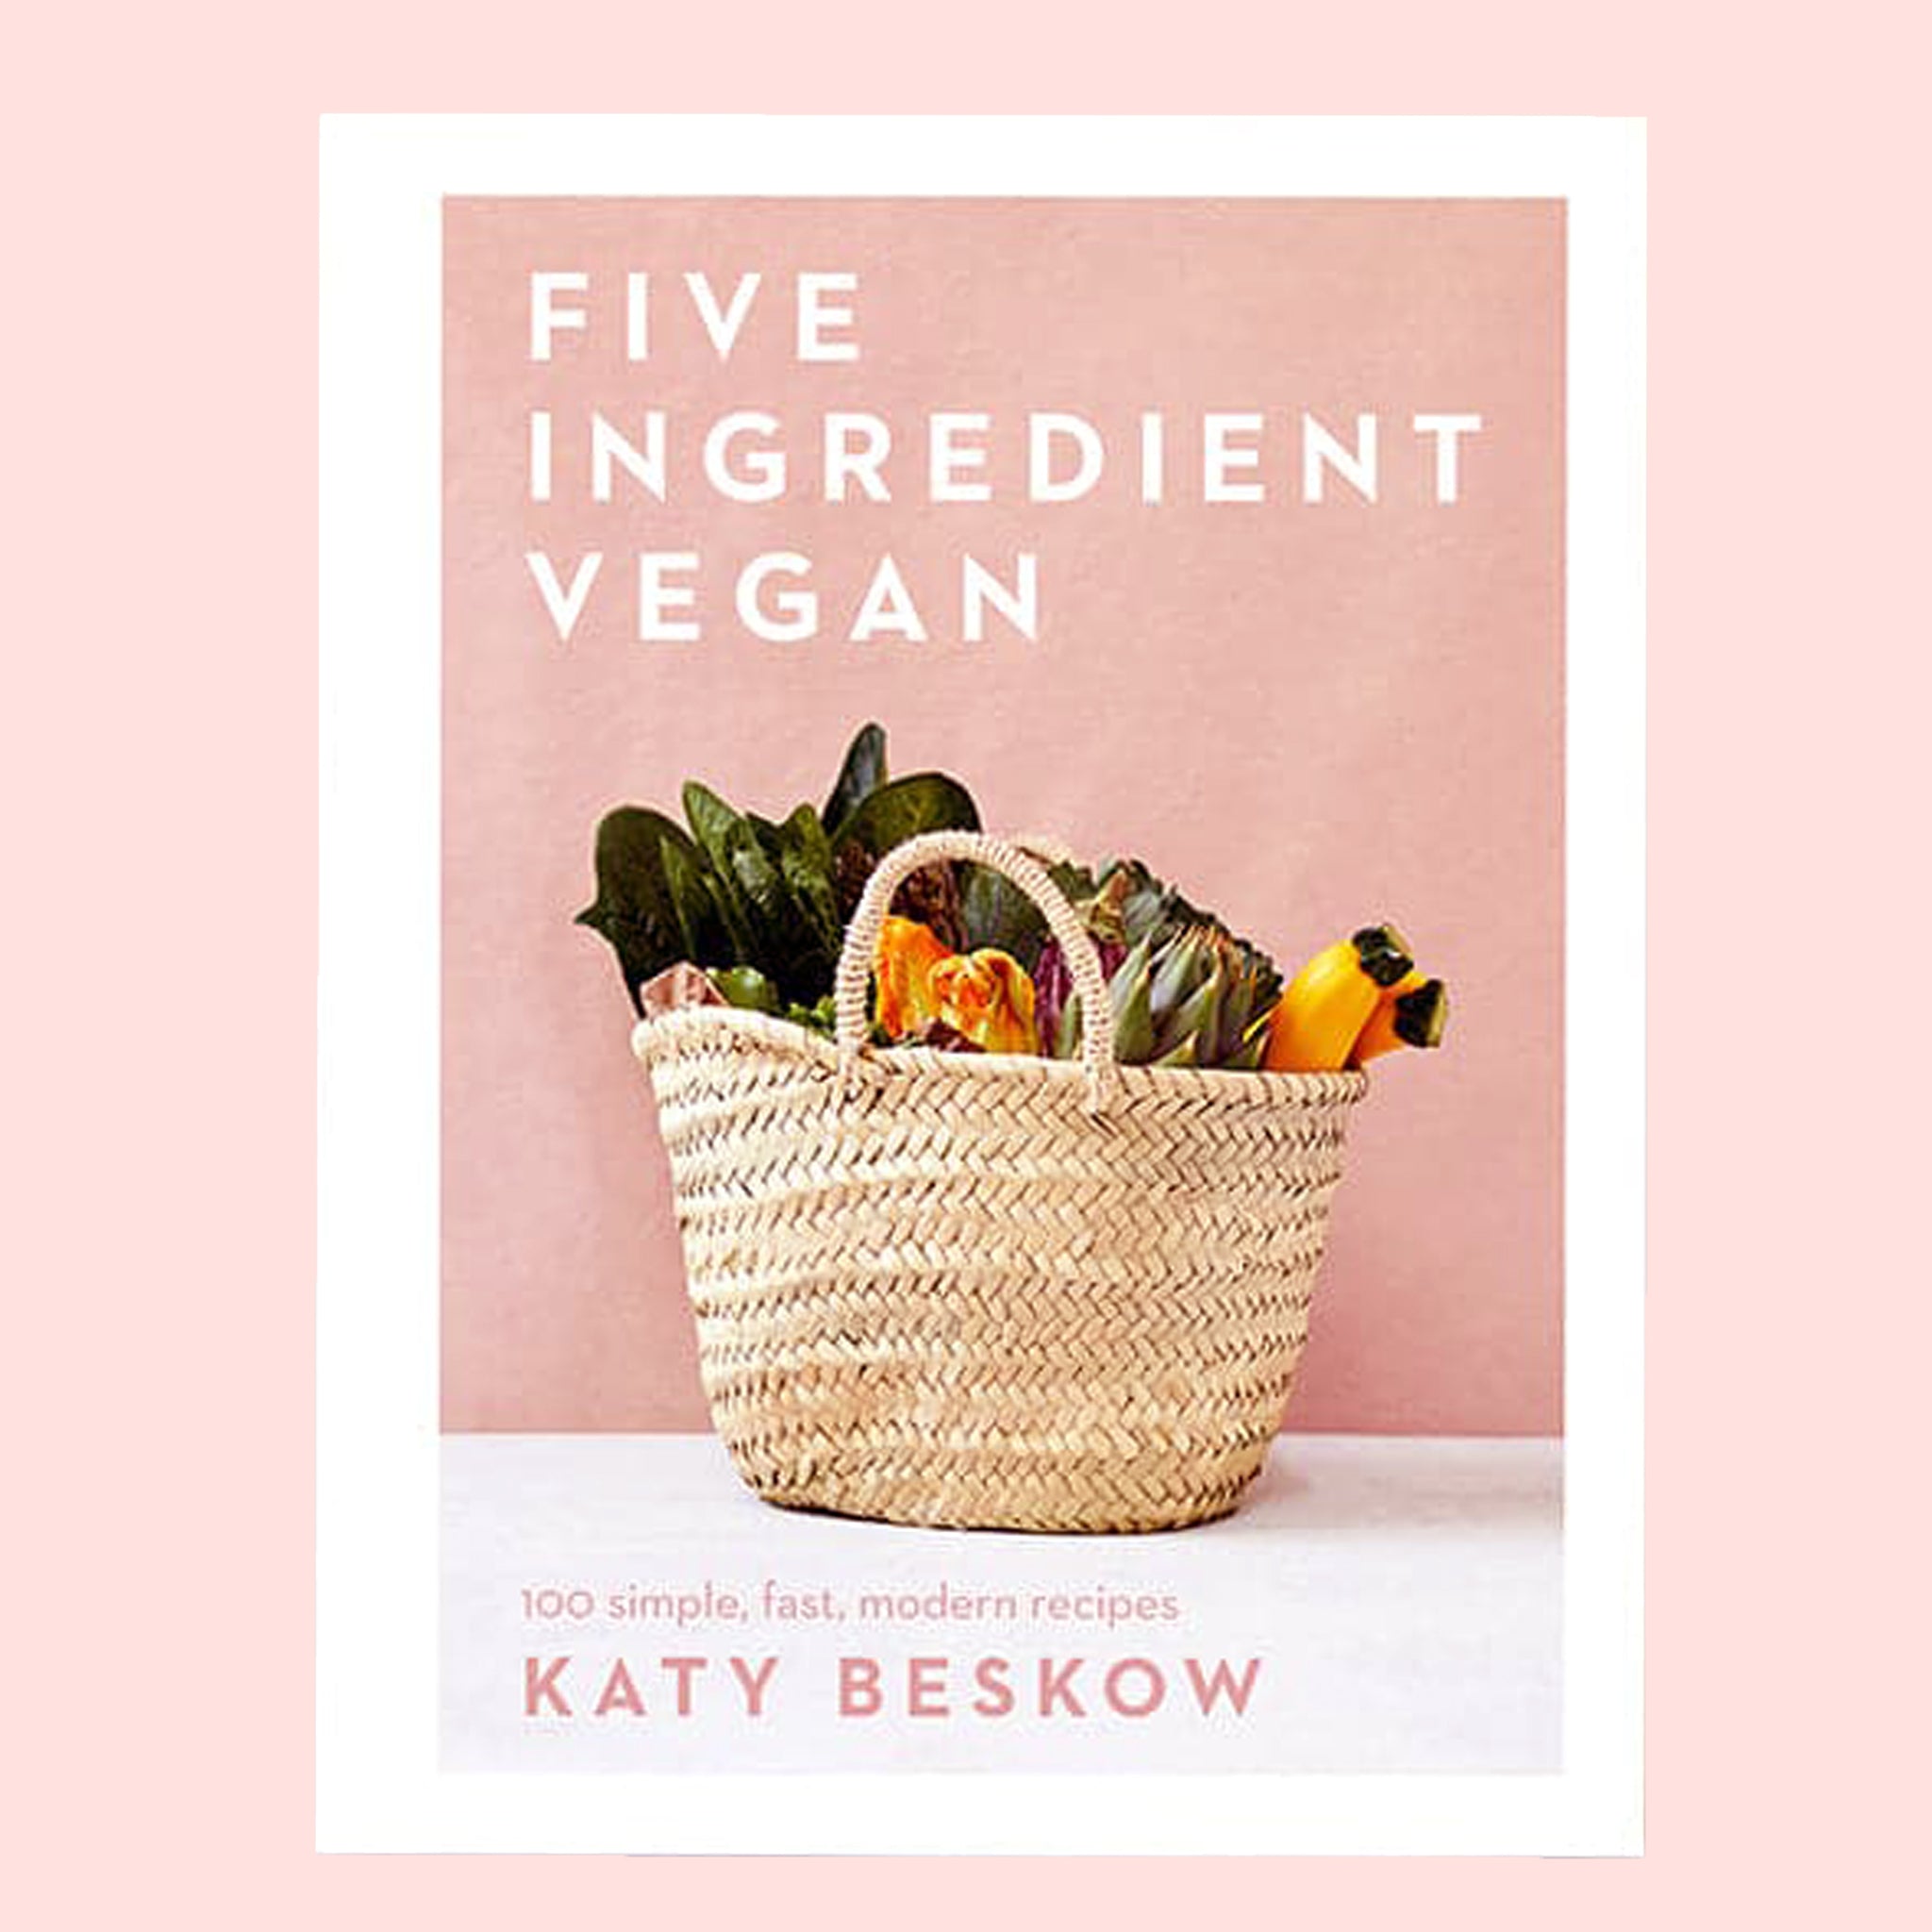 A salmon pink book cover with a neutral basket full of veggies along with a white border and white text that reads, "Five Ingredient Vegan'.